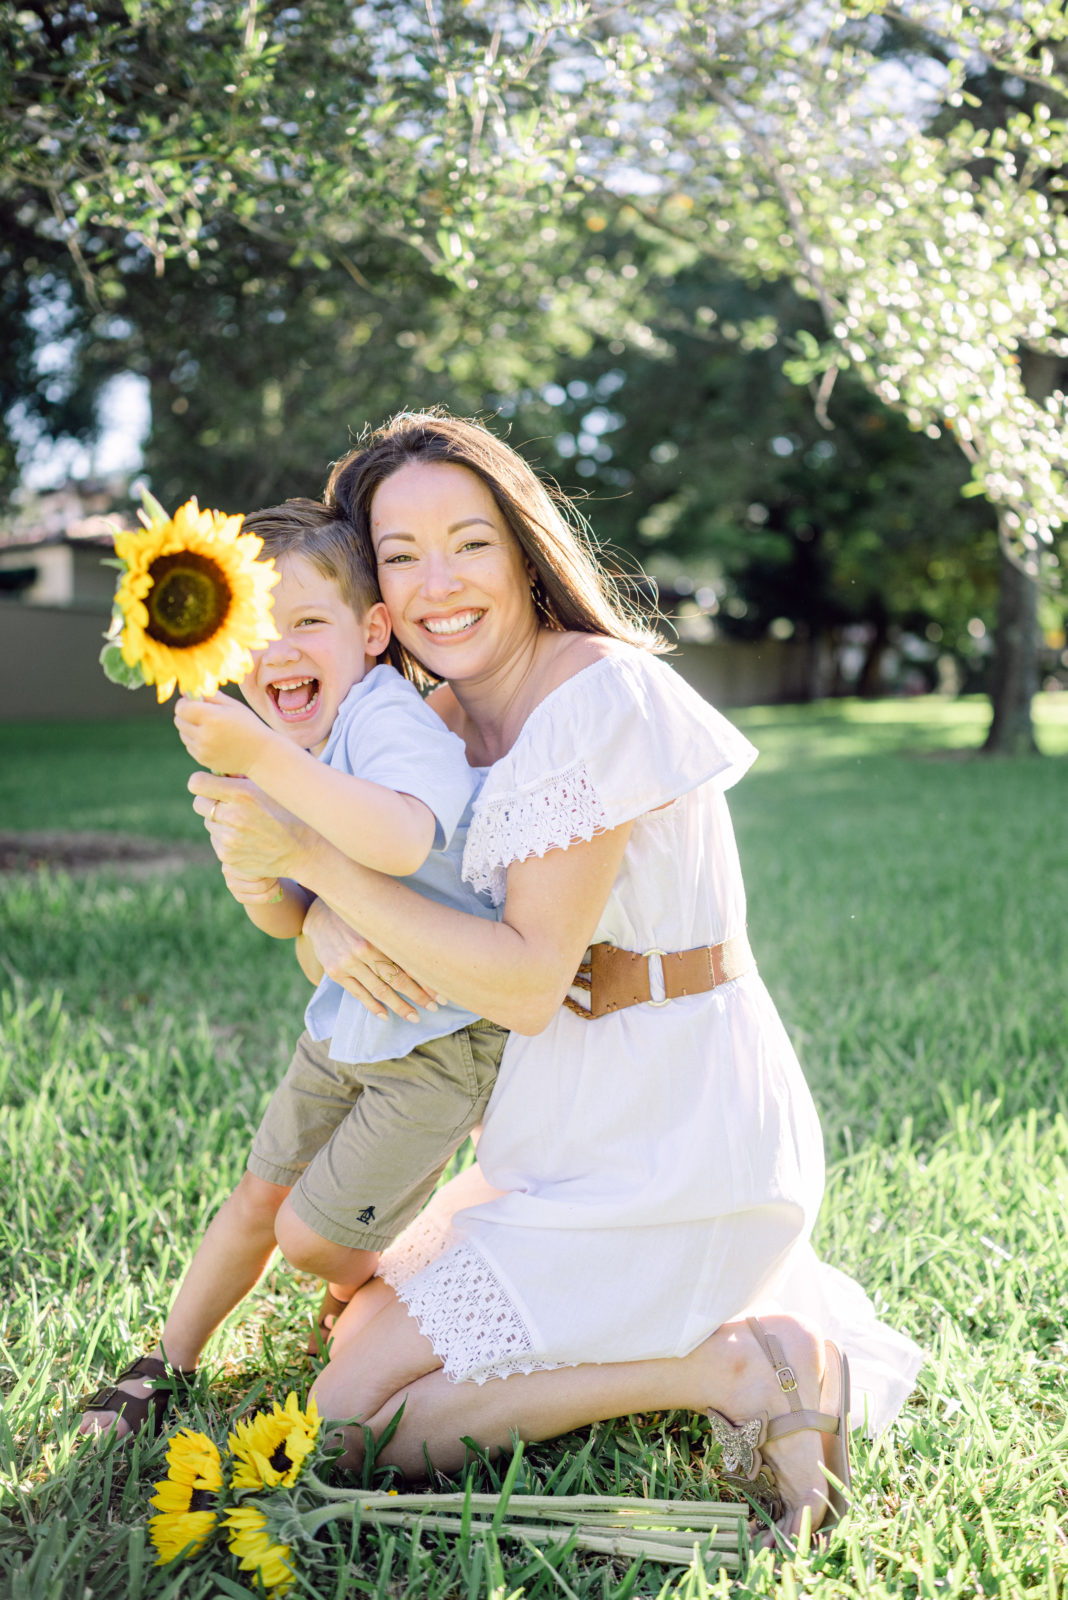 Mom hugging her son with a sunflower in a park